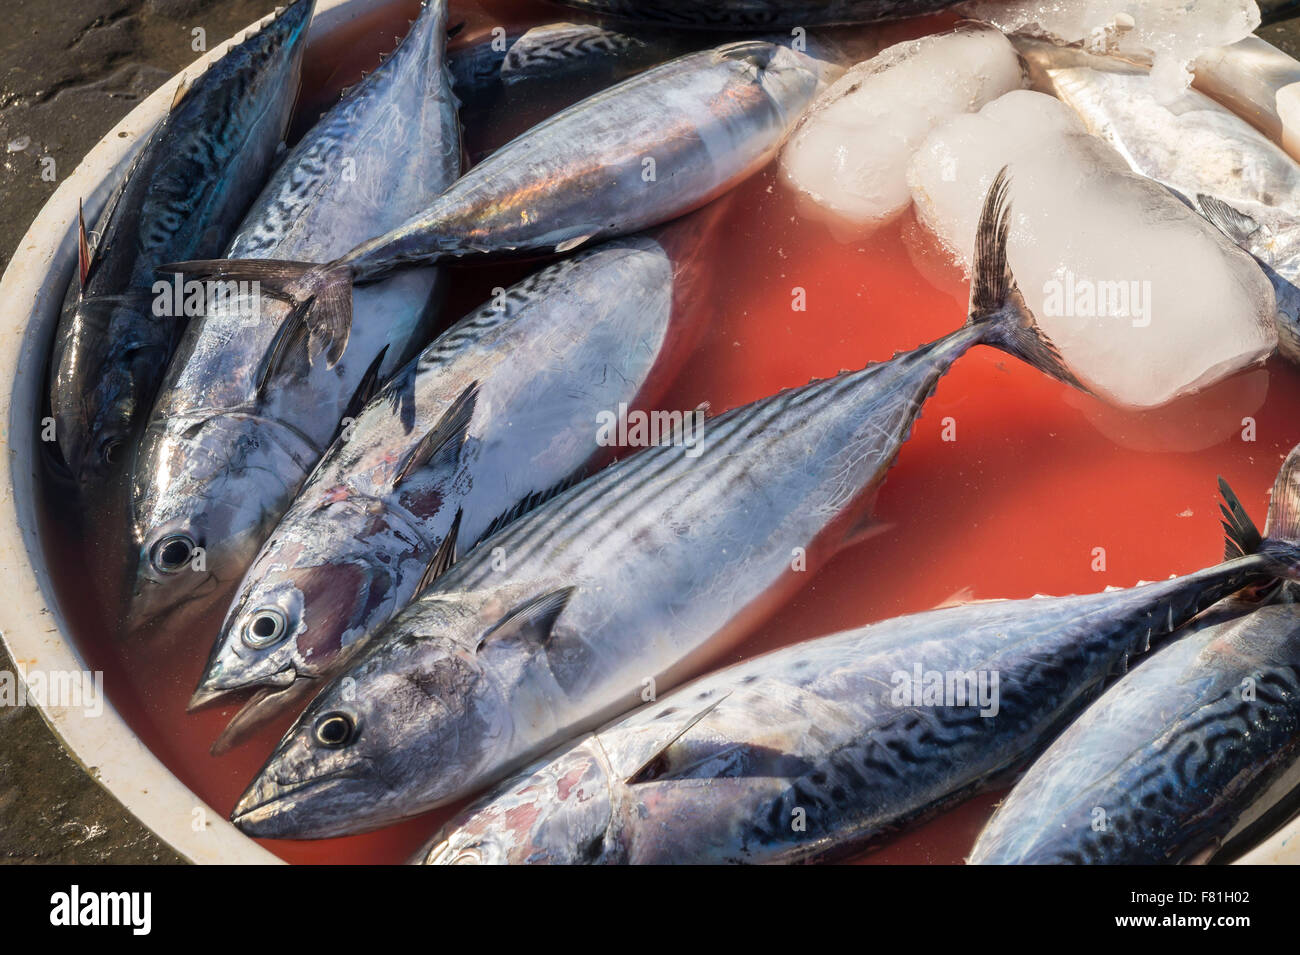 Typical outdoor Italian fish market with fresh fish and seafood Stock Photo